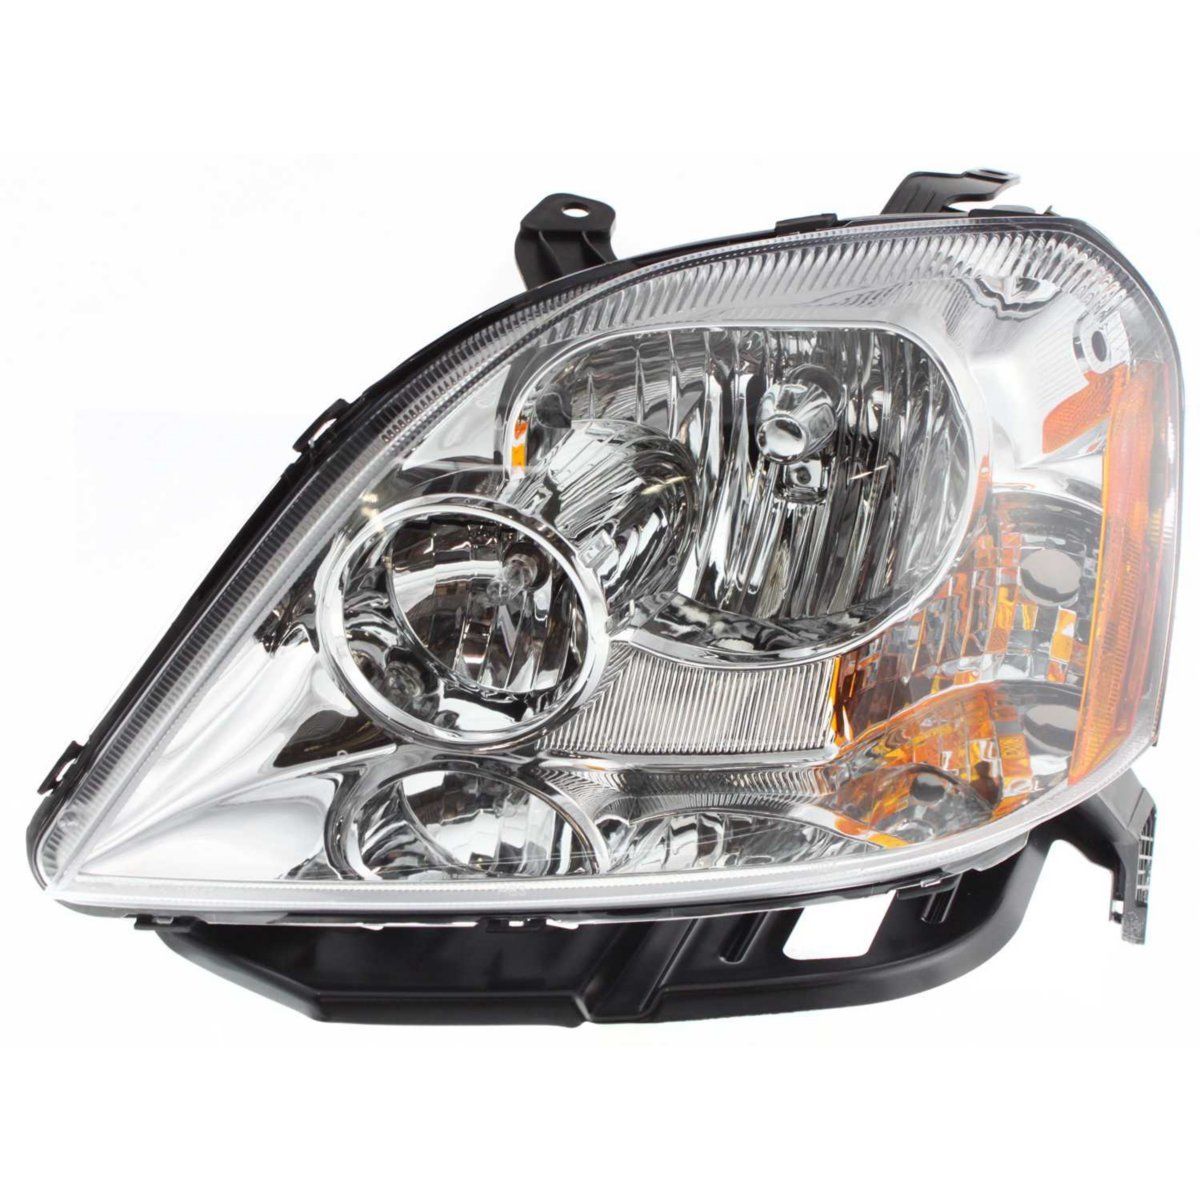 Headlight For 2005-2007 Ford Five Hundred Driver Side w/ bulb | eBay 2005 Ford Five Hundred Headlight Bulb Replacement